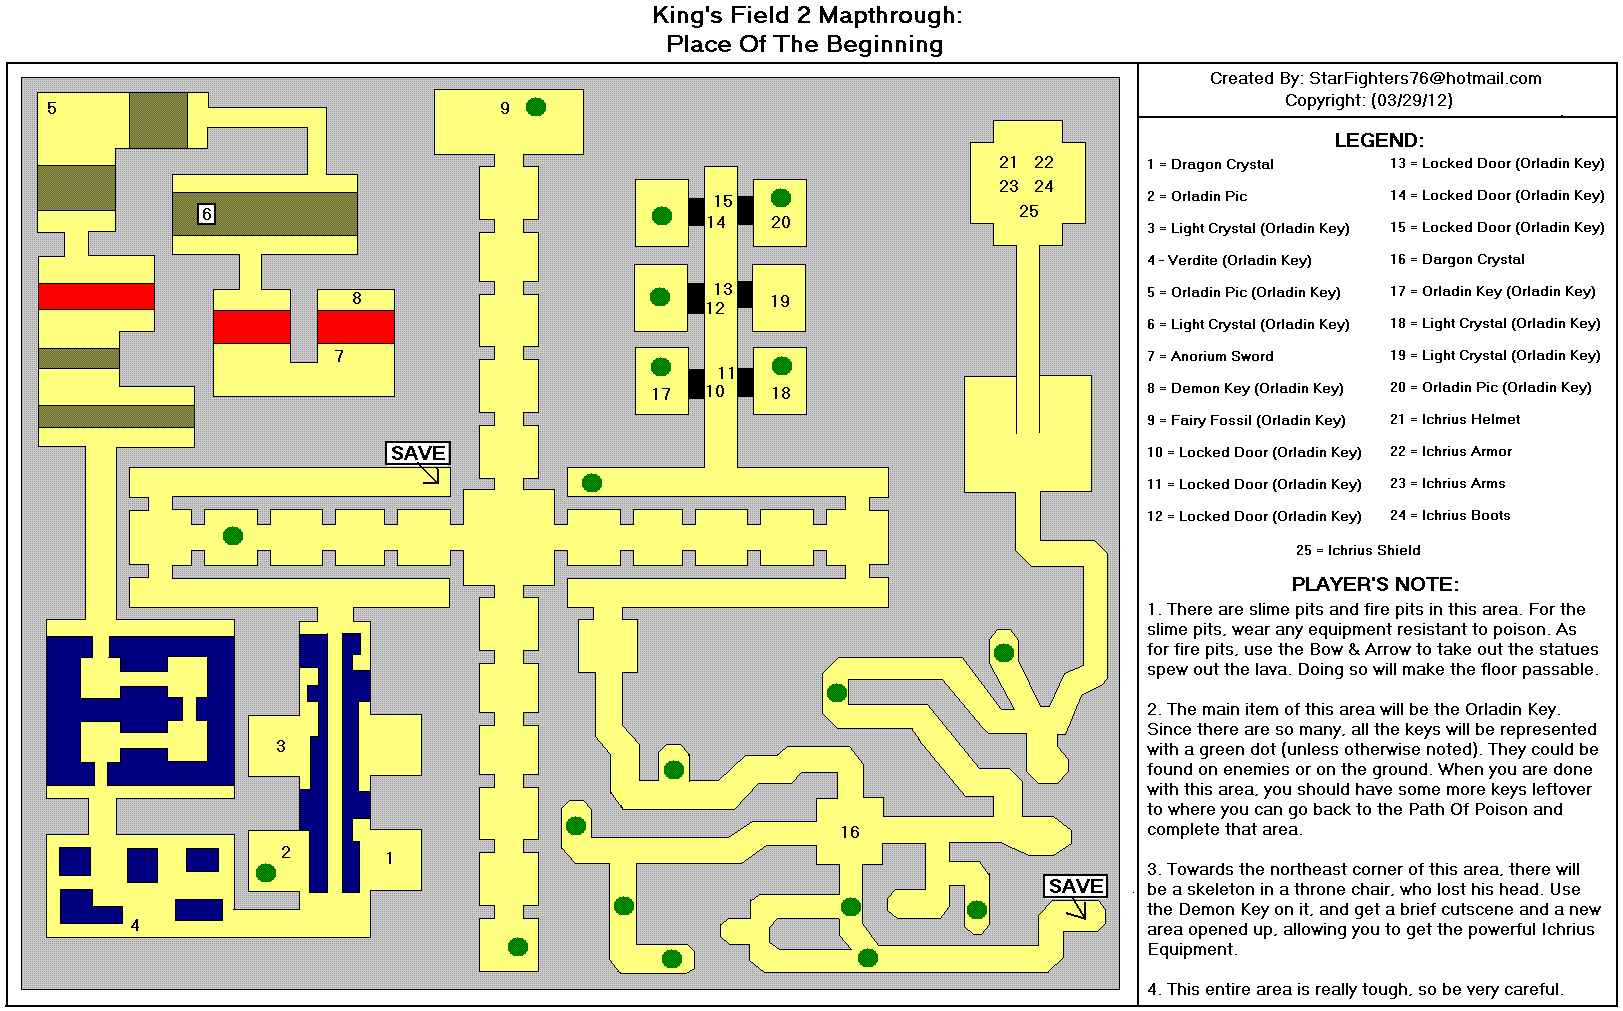 King's Field II Place Of The Beginning Map (GIF) - StarFighters76 ...